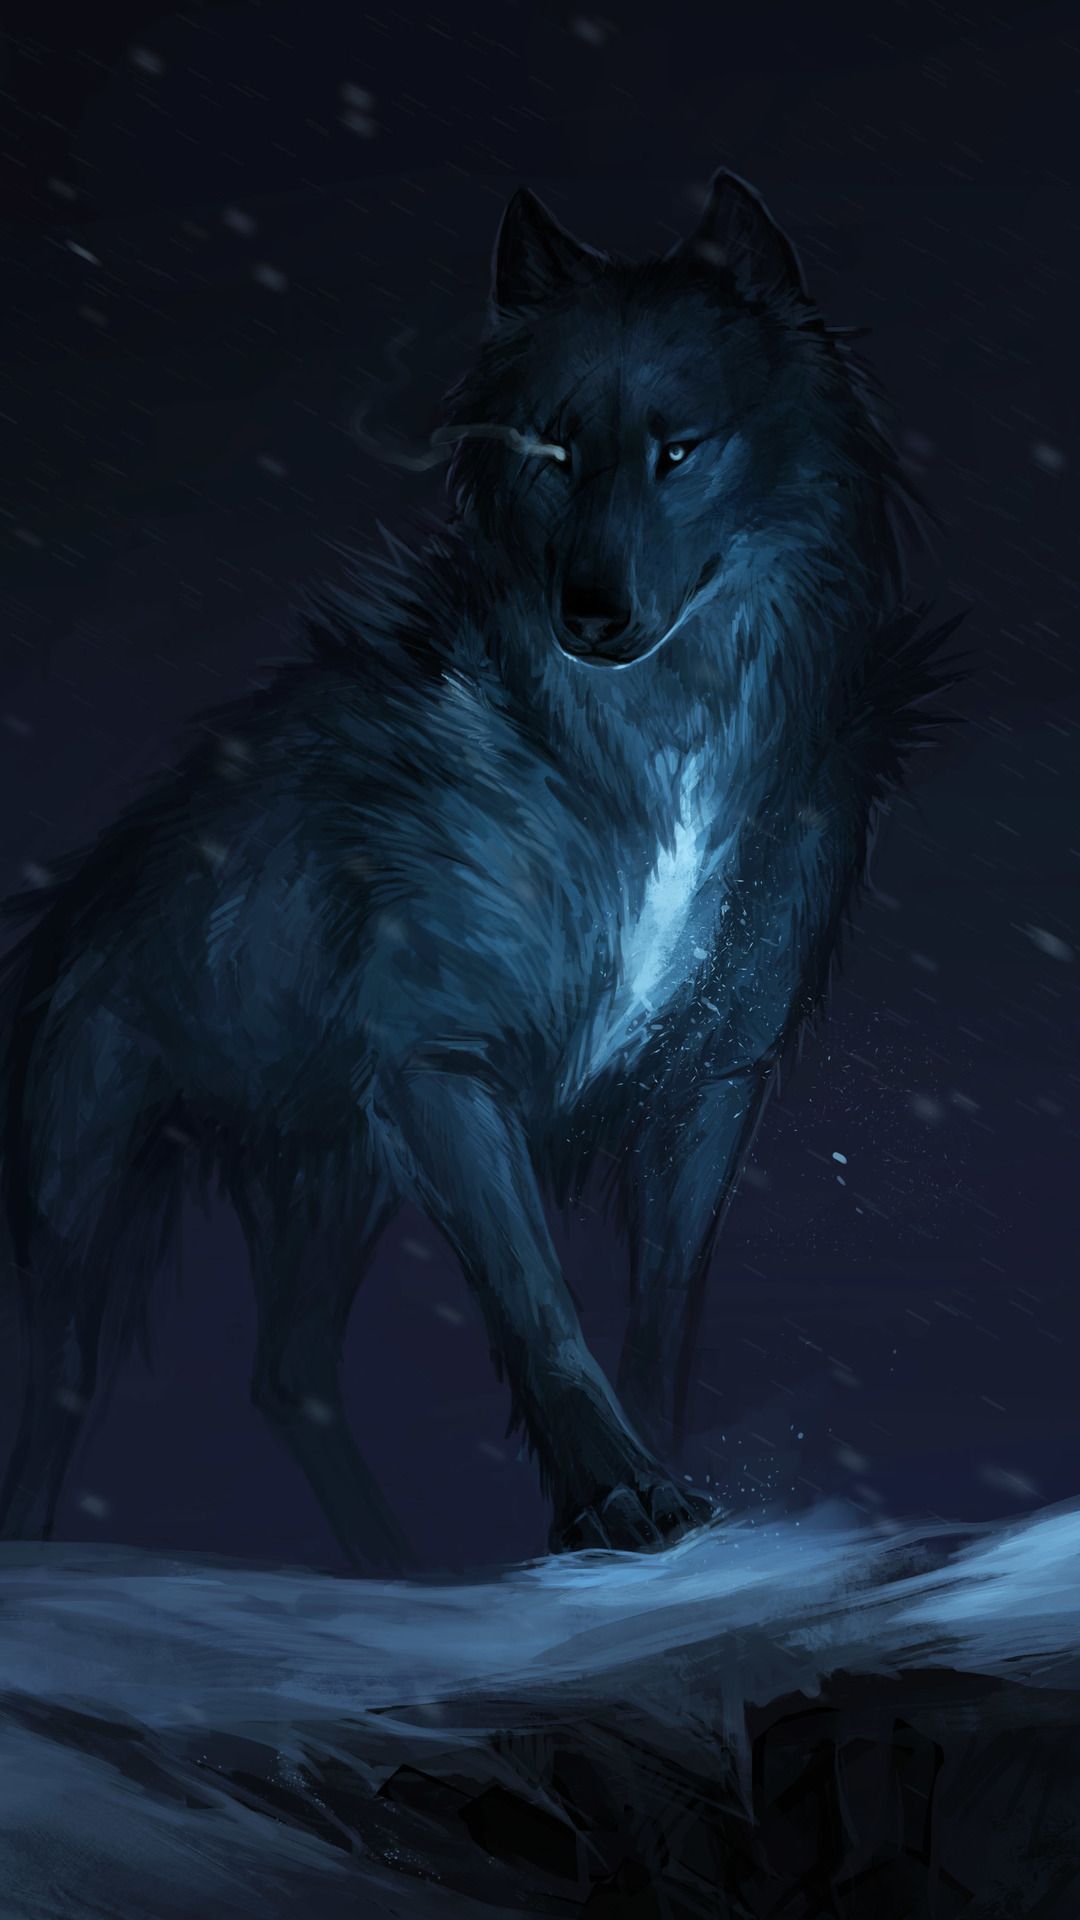 Wolf Drawing In 1080x1920 Resolution. Wolf wallpaper, Fantasy wolf, Wolf drawing